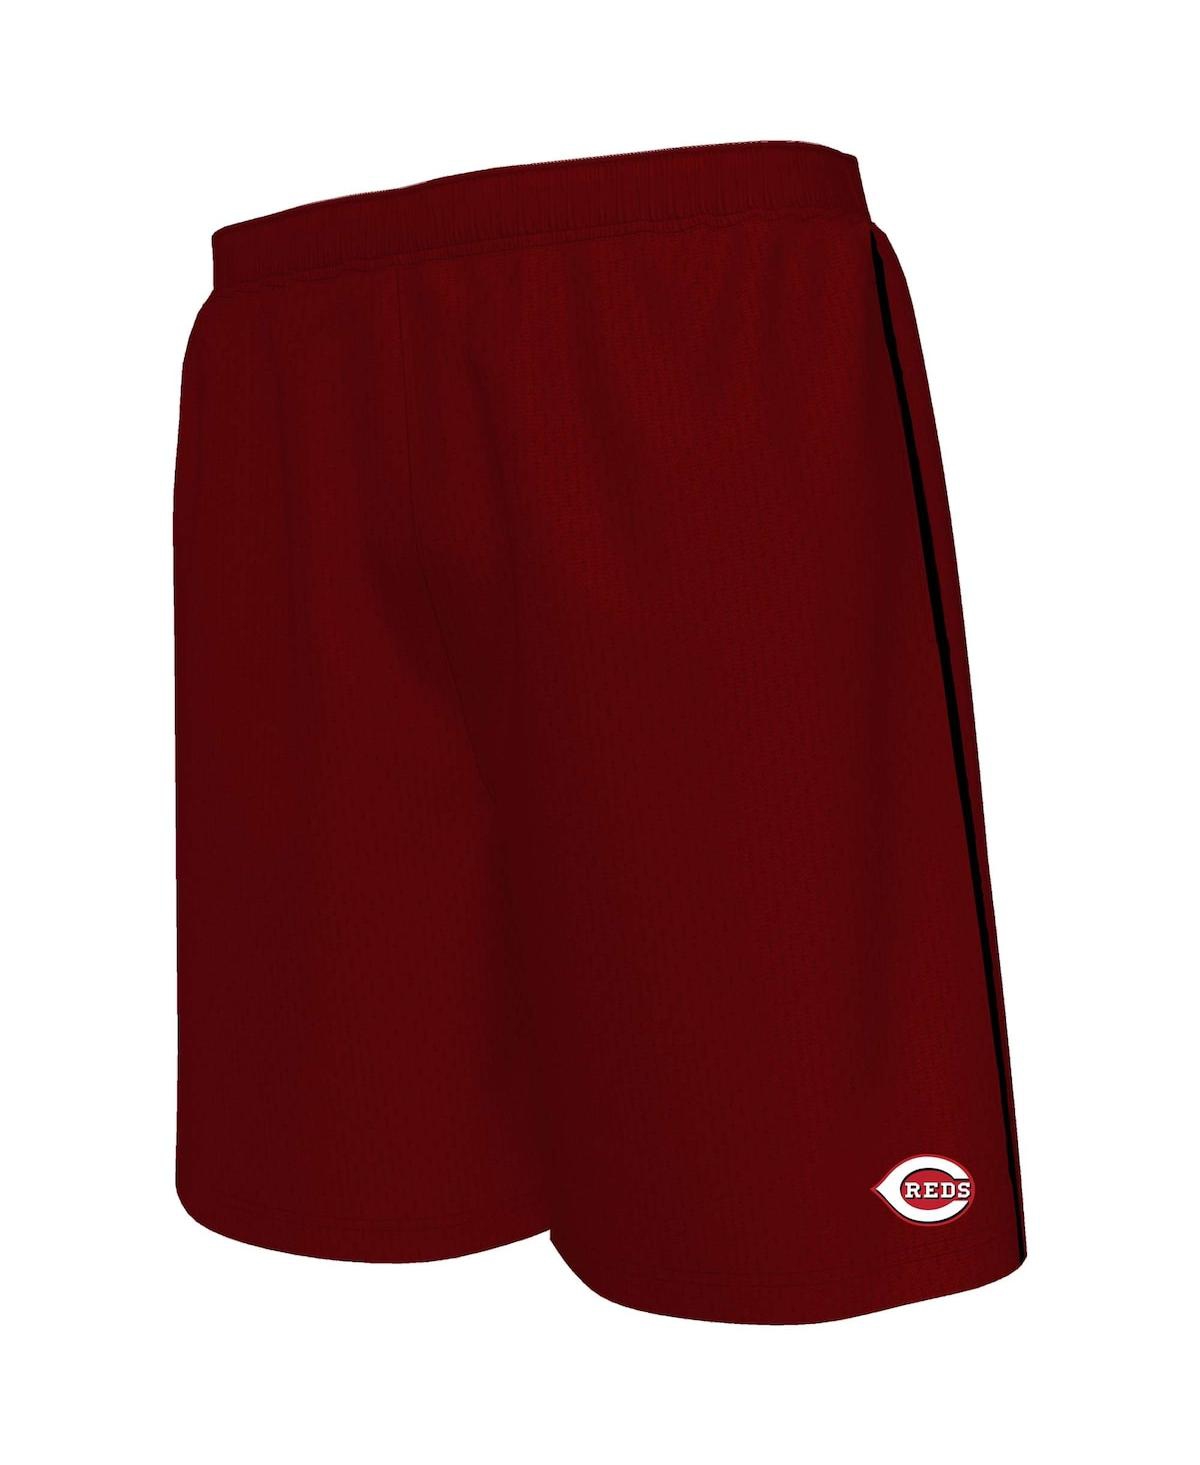 Men's Majestic Red Cincinnati Reds Big and Tall Mesh Shorts - Red